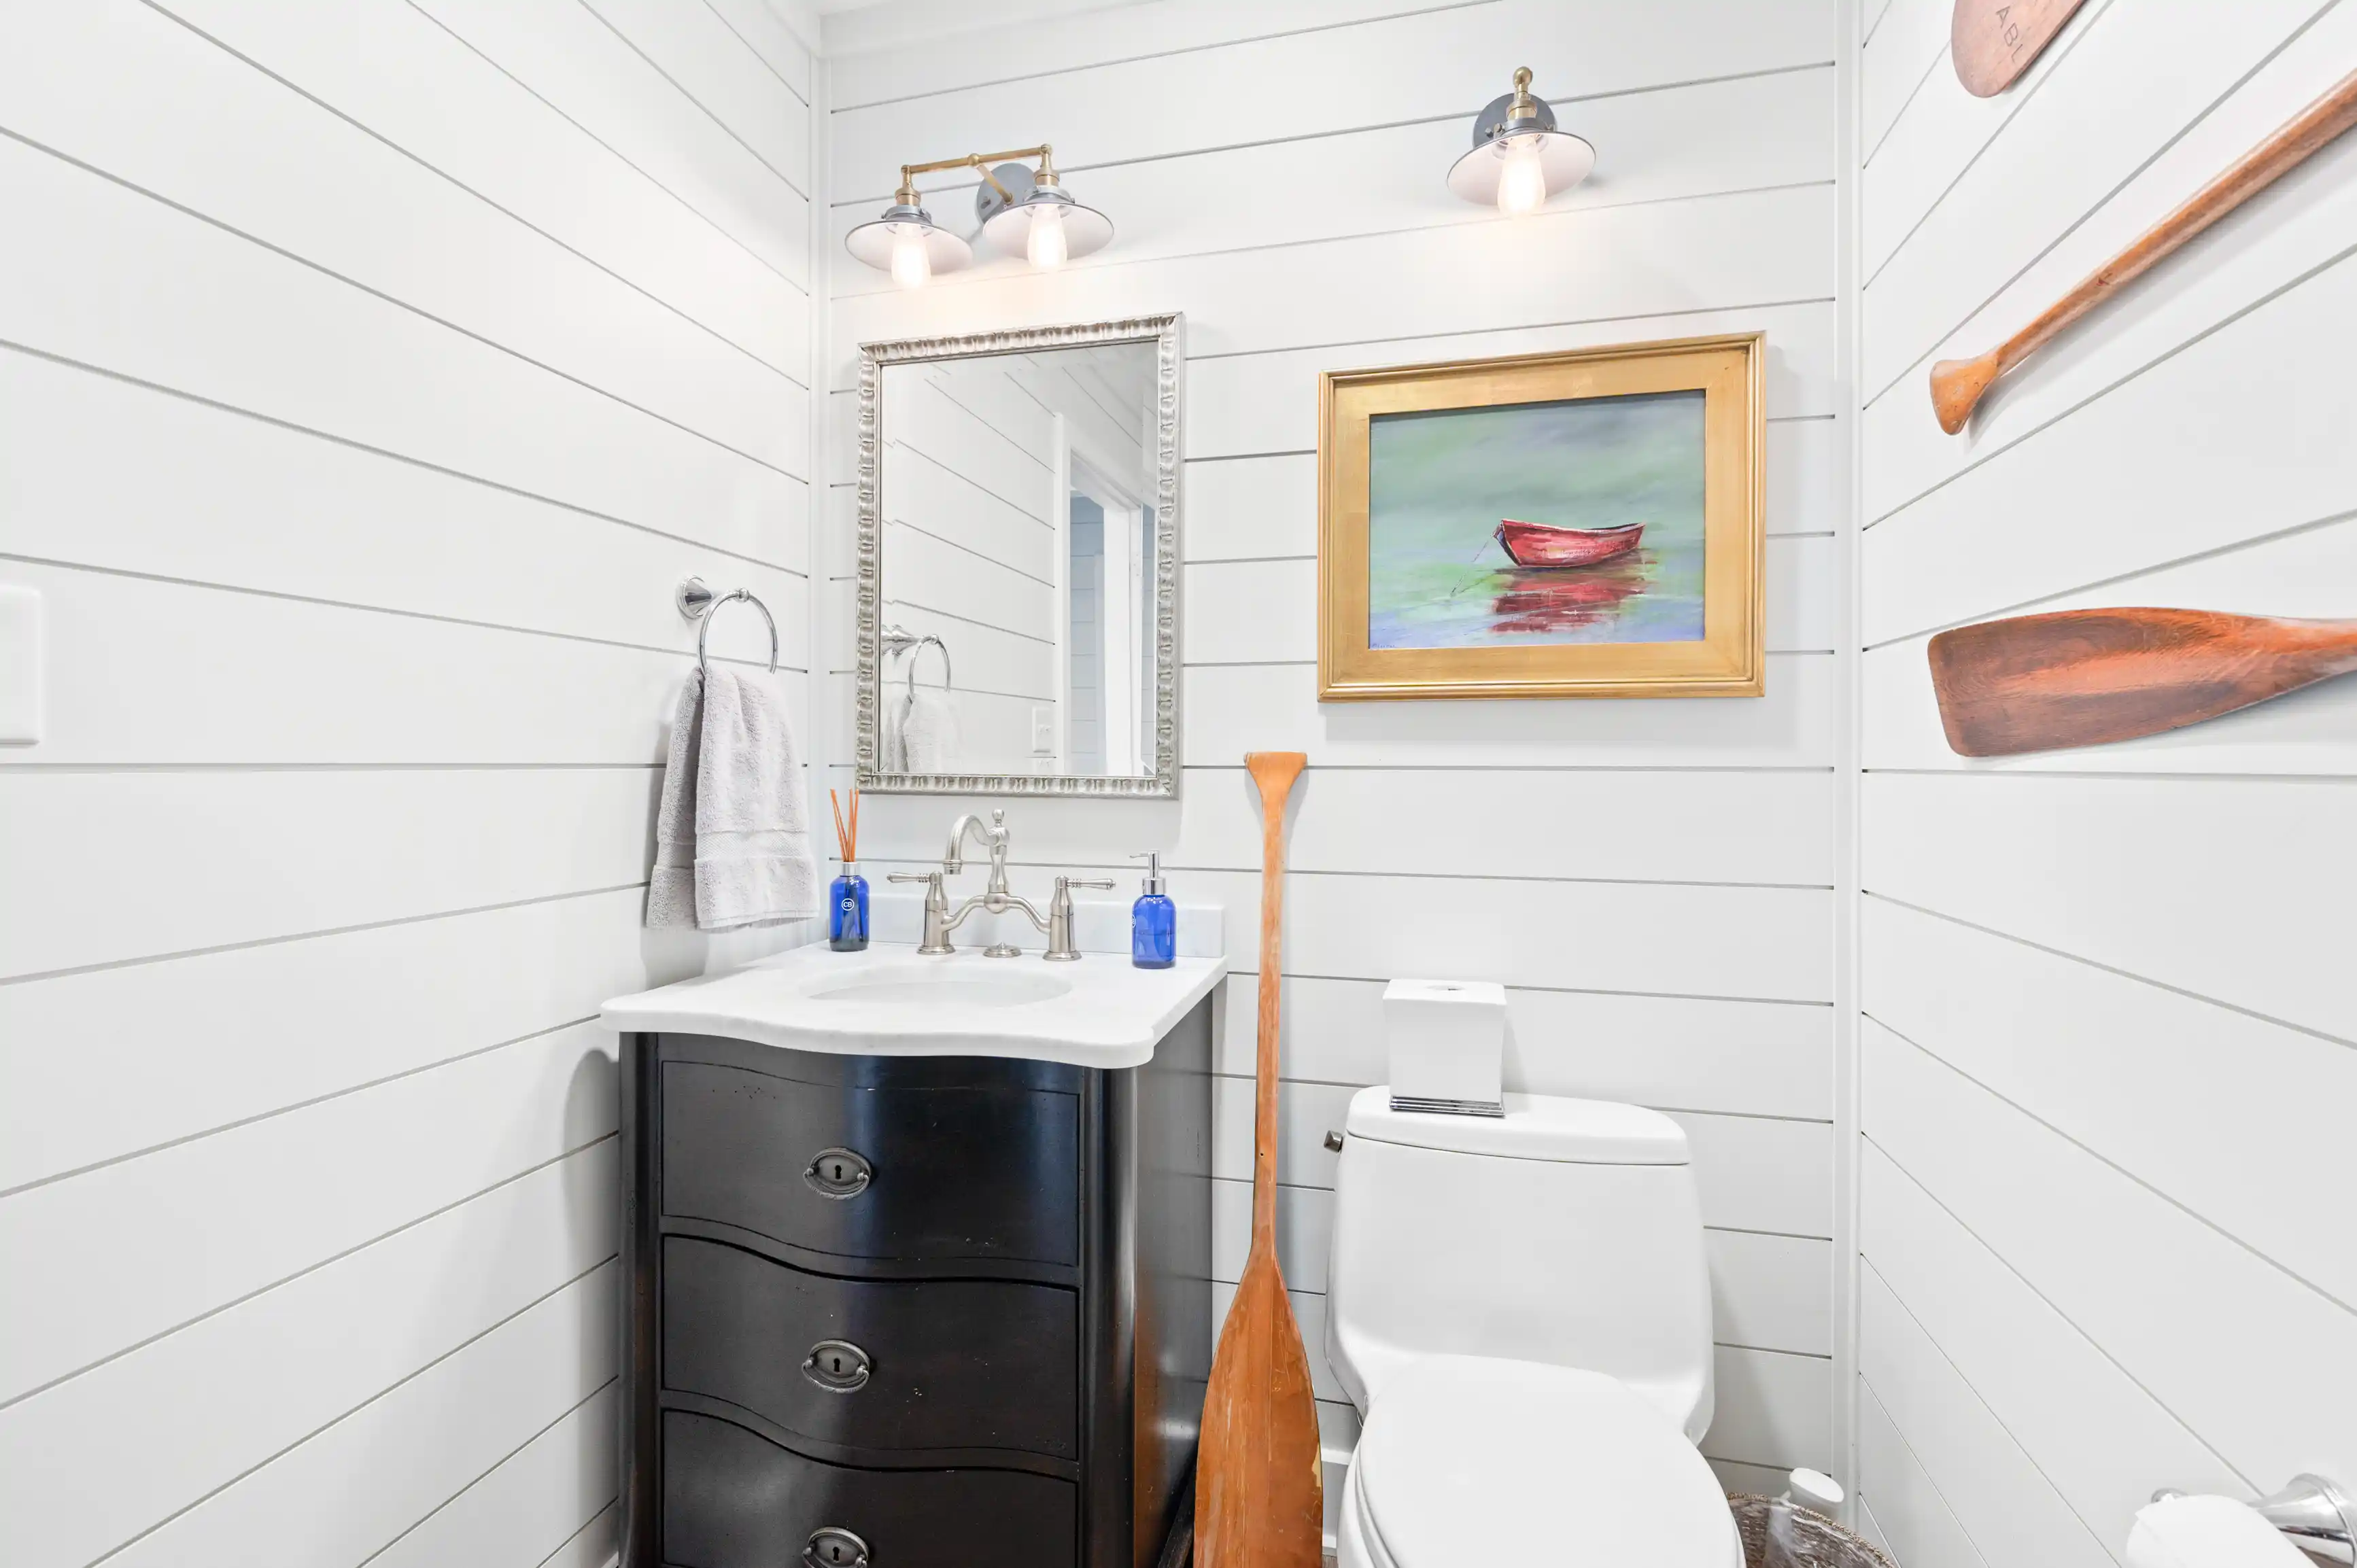 A bright, nautical-themed bathroom with white shiplap walls, a framed mirror above a sink, maritime decor including a painting of a red boat, and oars mounted on the wall.